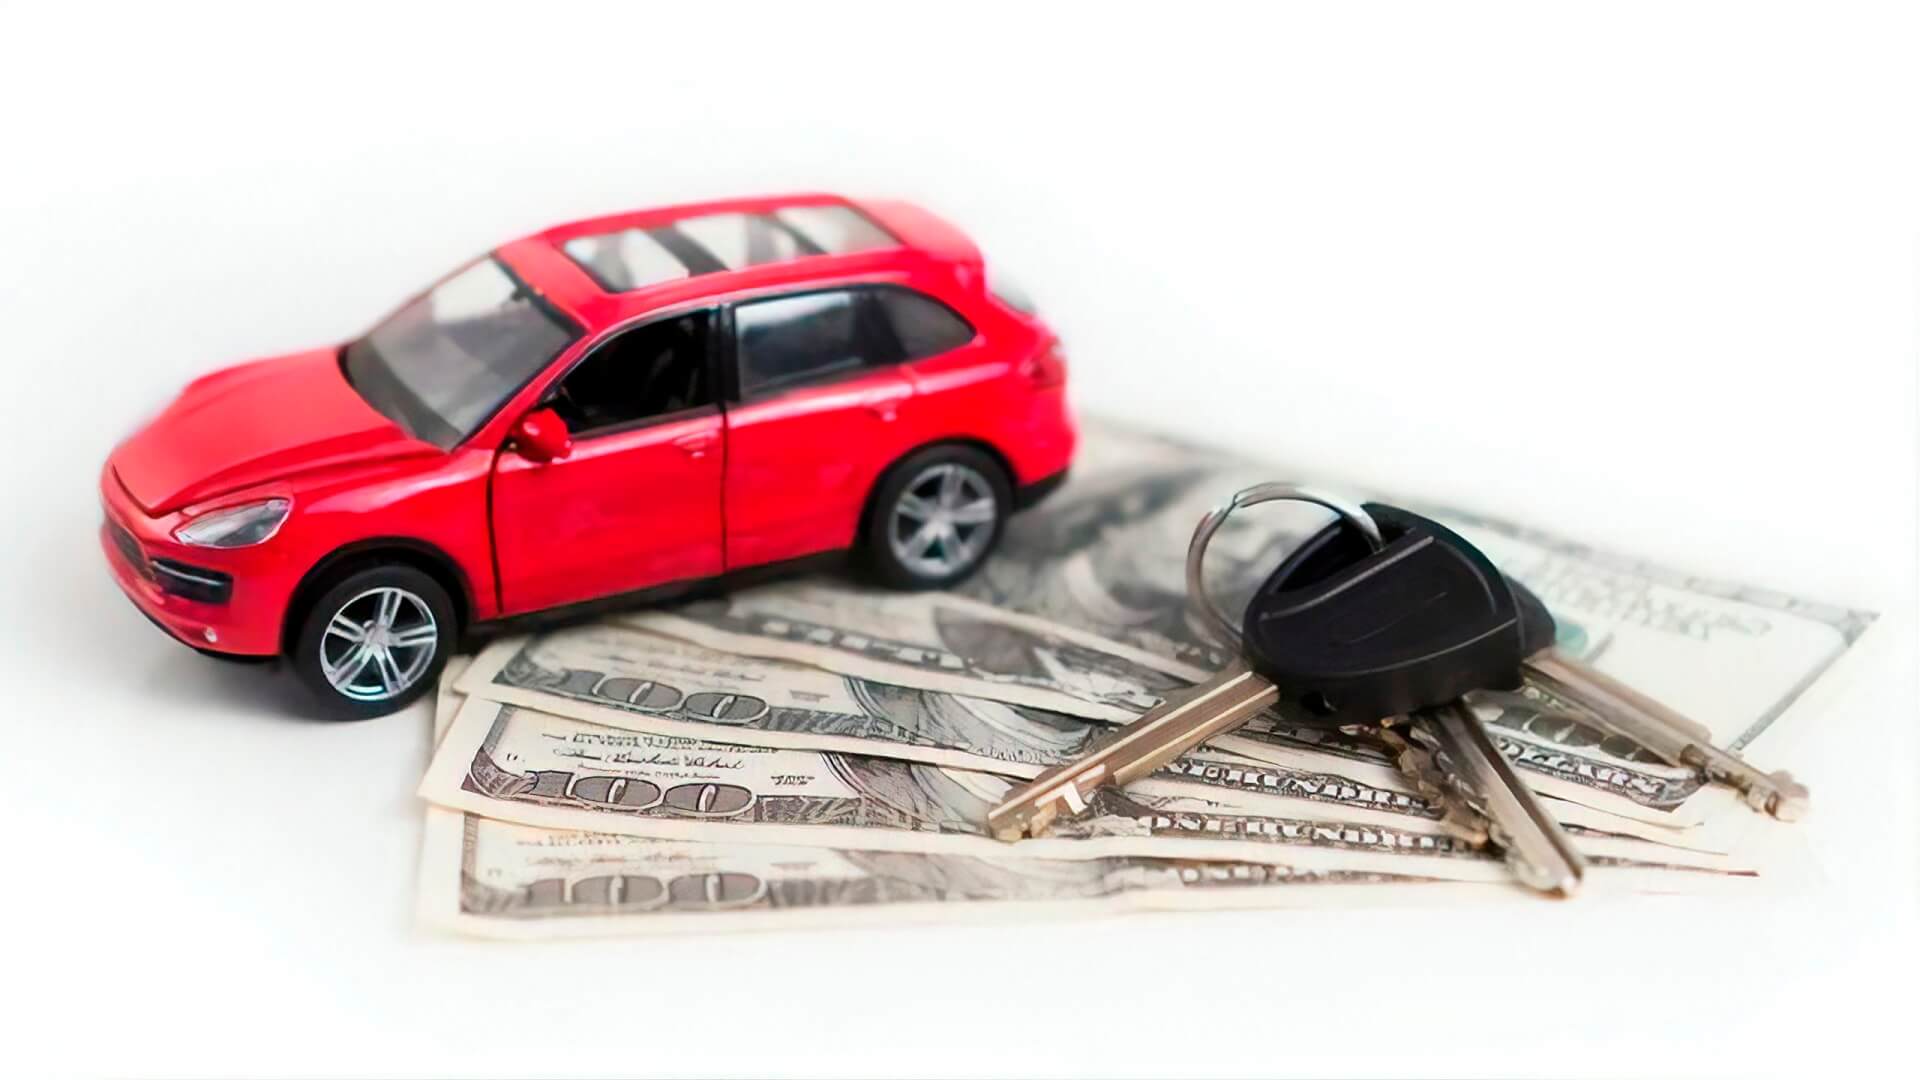 Tax day deals: Tips which every dealership should follow